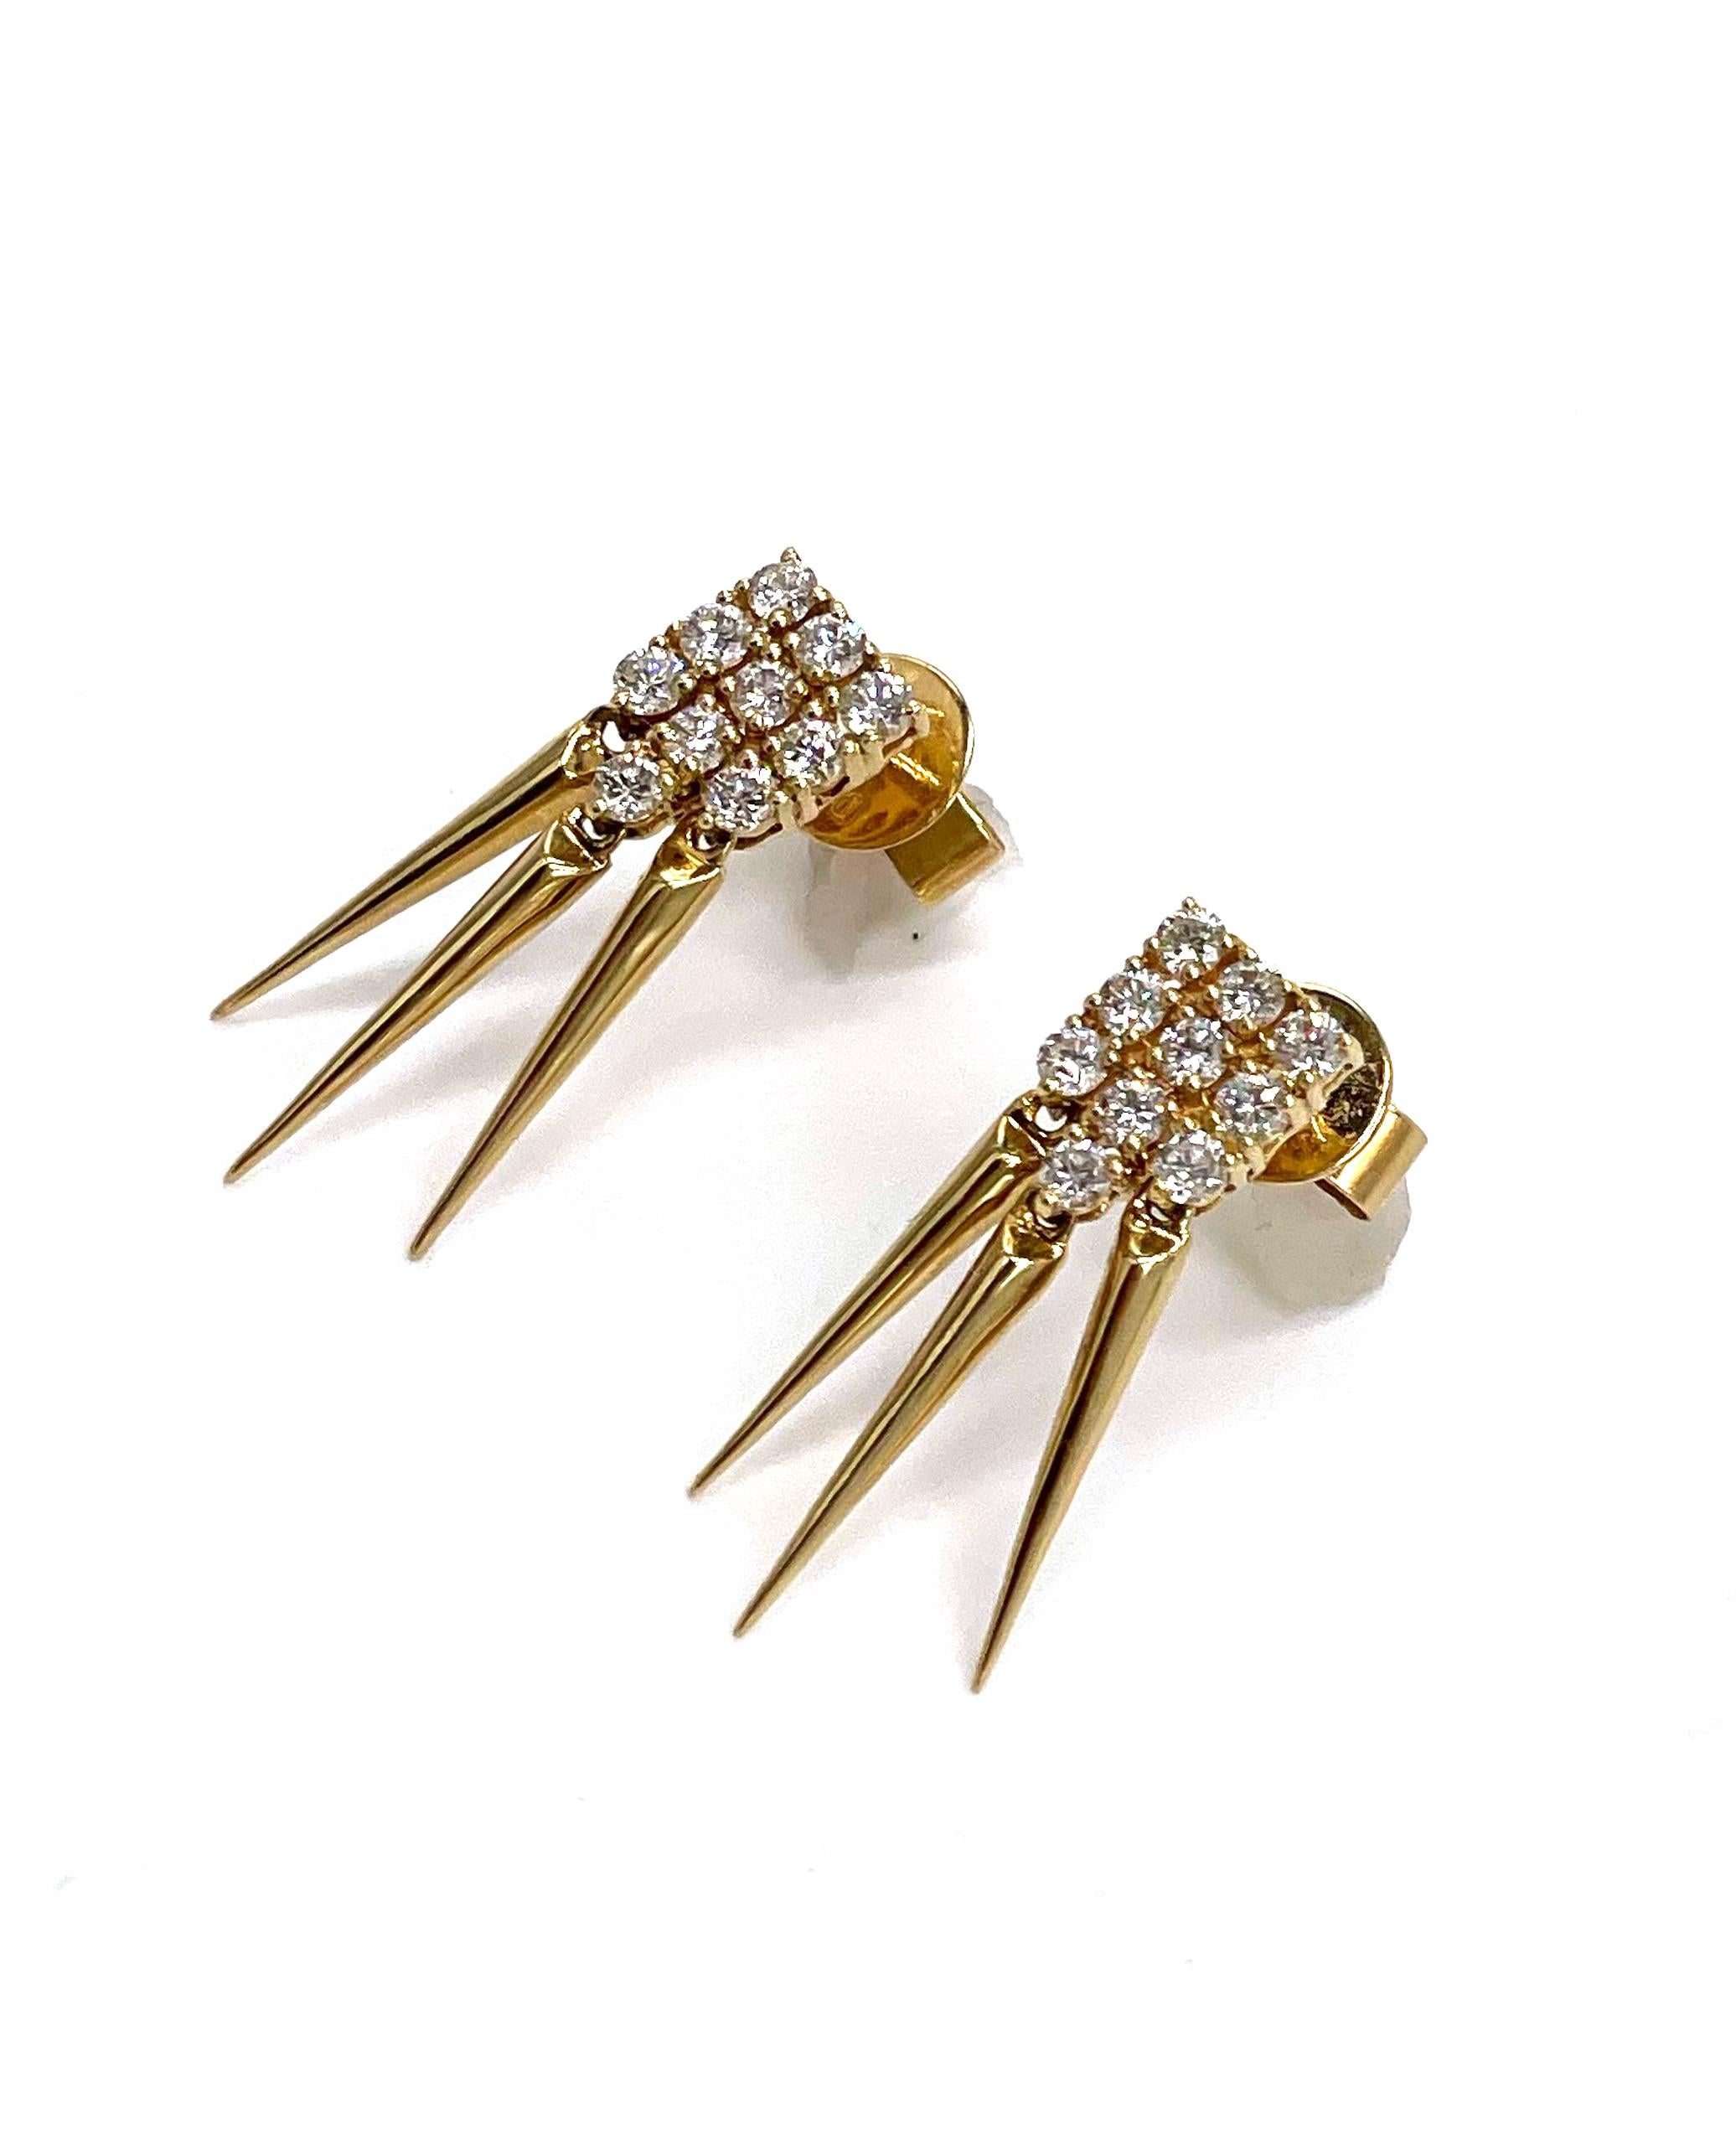 Classy and edgy. This pair made by Doves by Doron Paloma is made of 18K yellow gold and diamonds.  The pair features a square shape top furnished with 20 prong set round brilliant-cut diamonds totaling 0.62 carats.  The earrings have dainty spikes